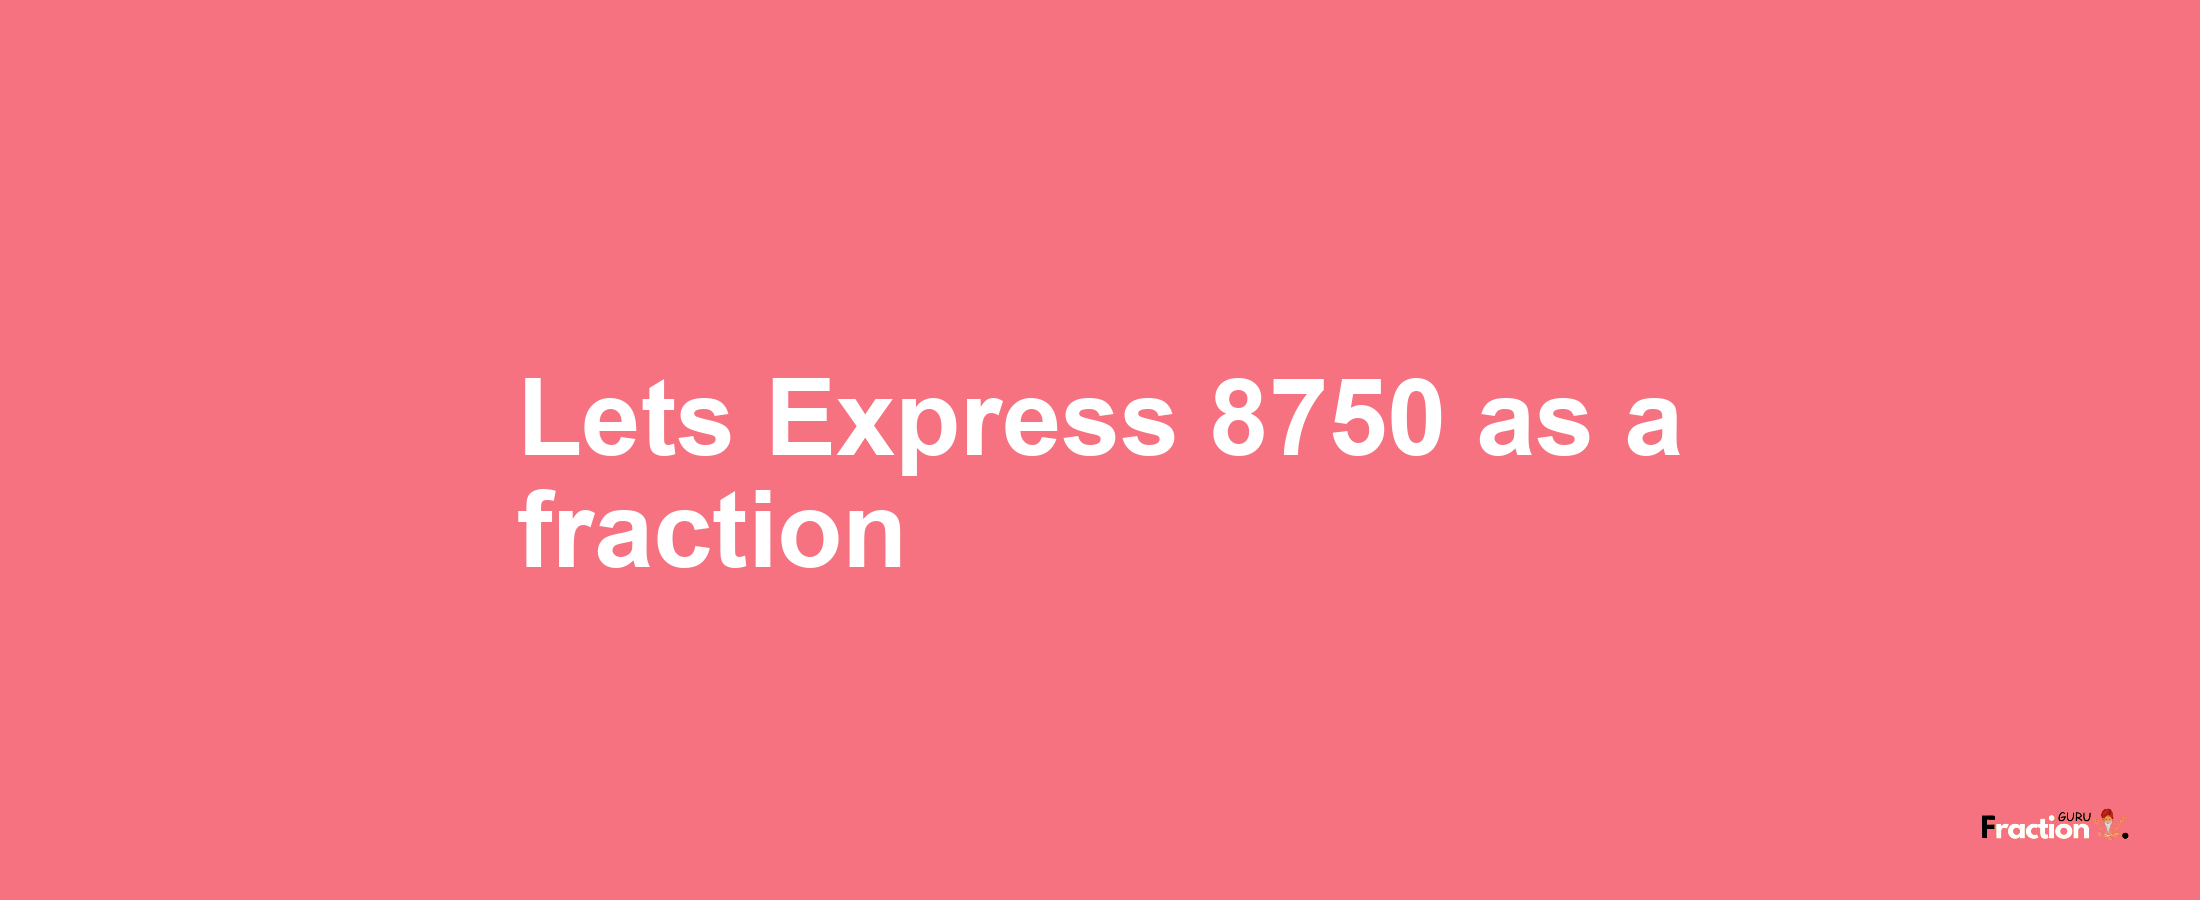 Lets Express 8750 as afraction